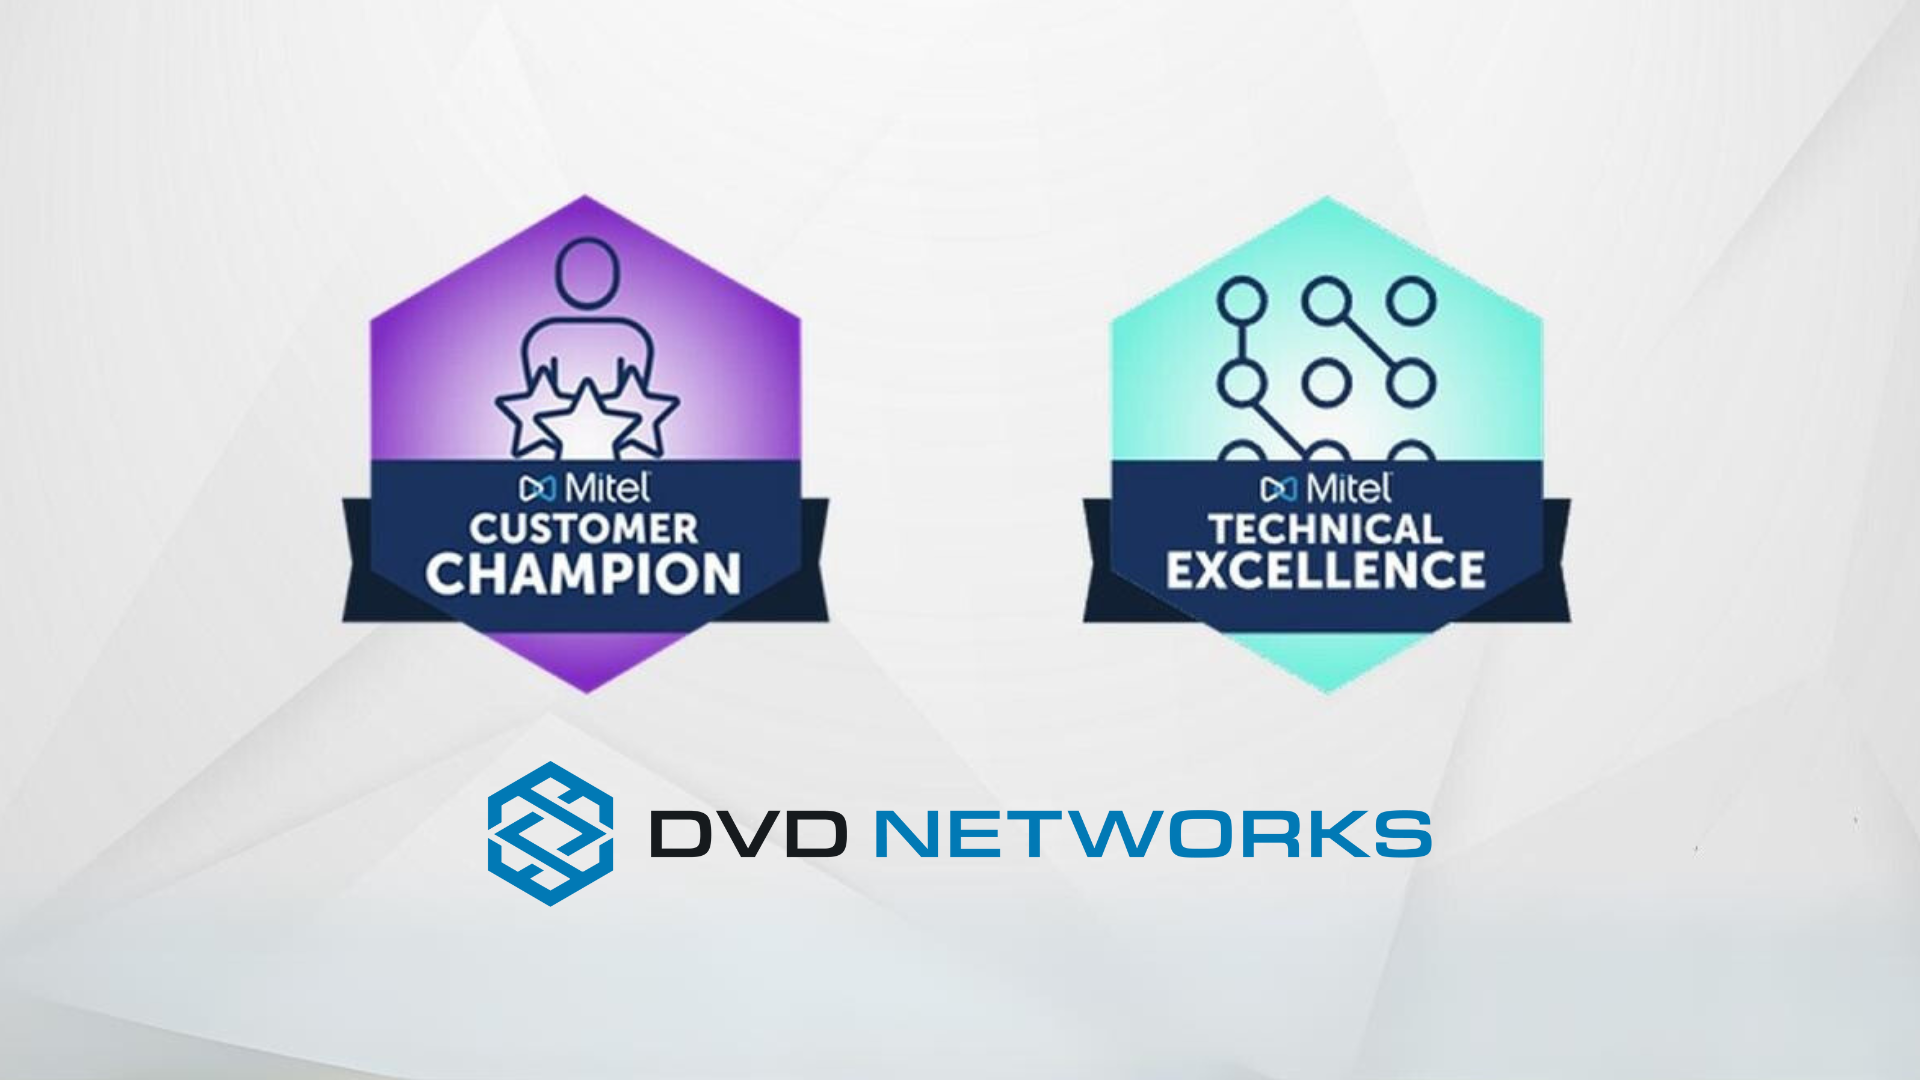 Rebrand to DVD Networks